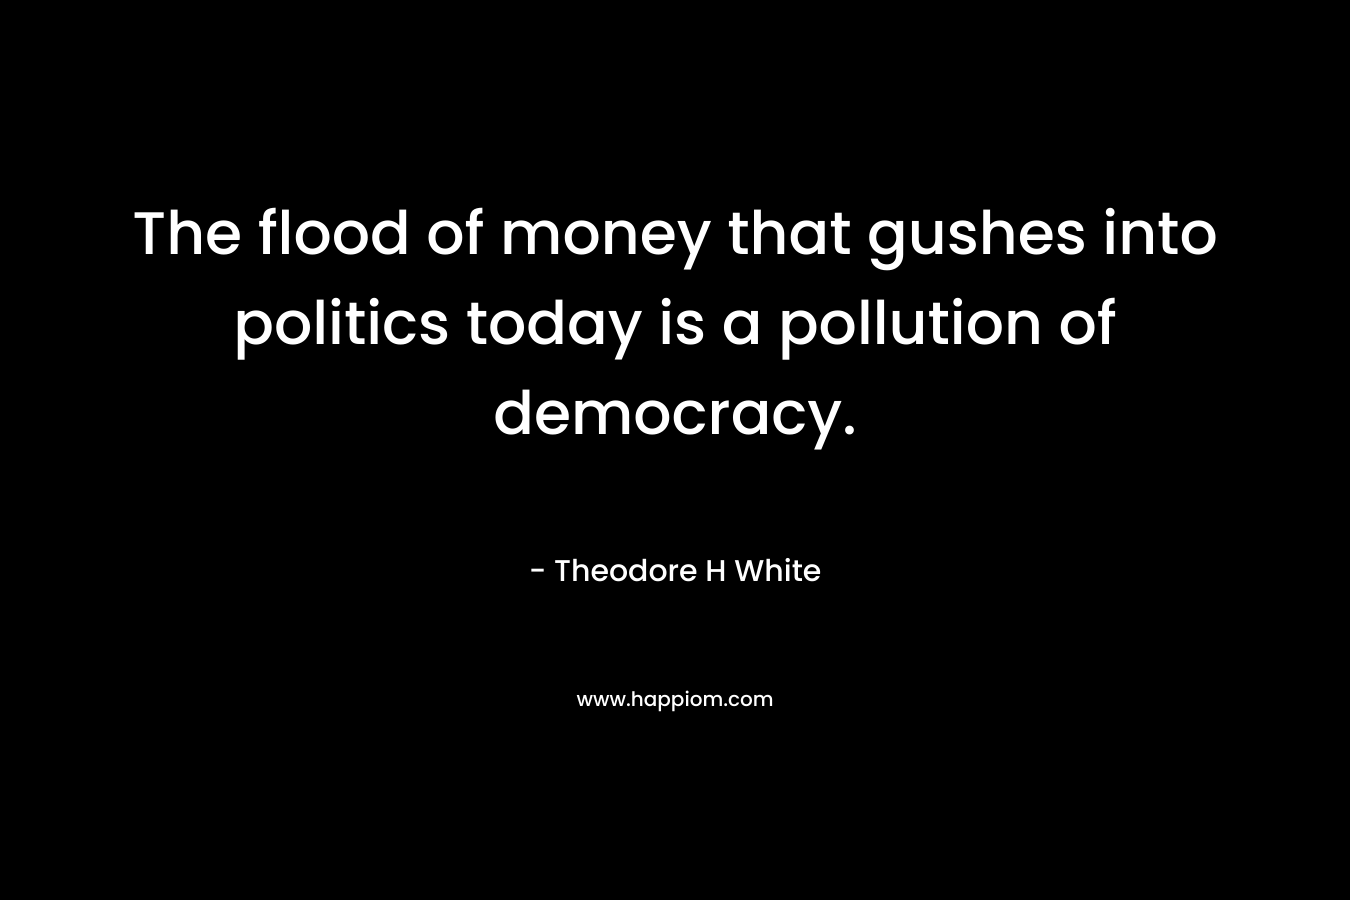 The flood of money that gushes into politics today is a pollution of democracy. – Theodore H White